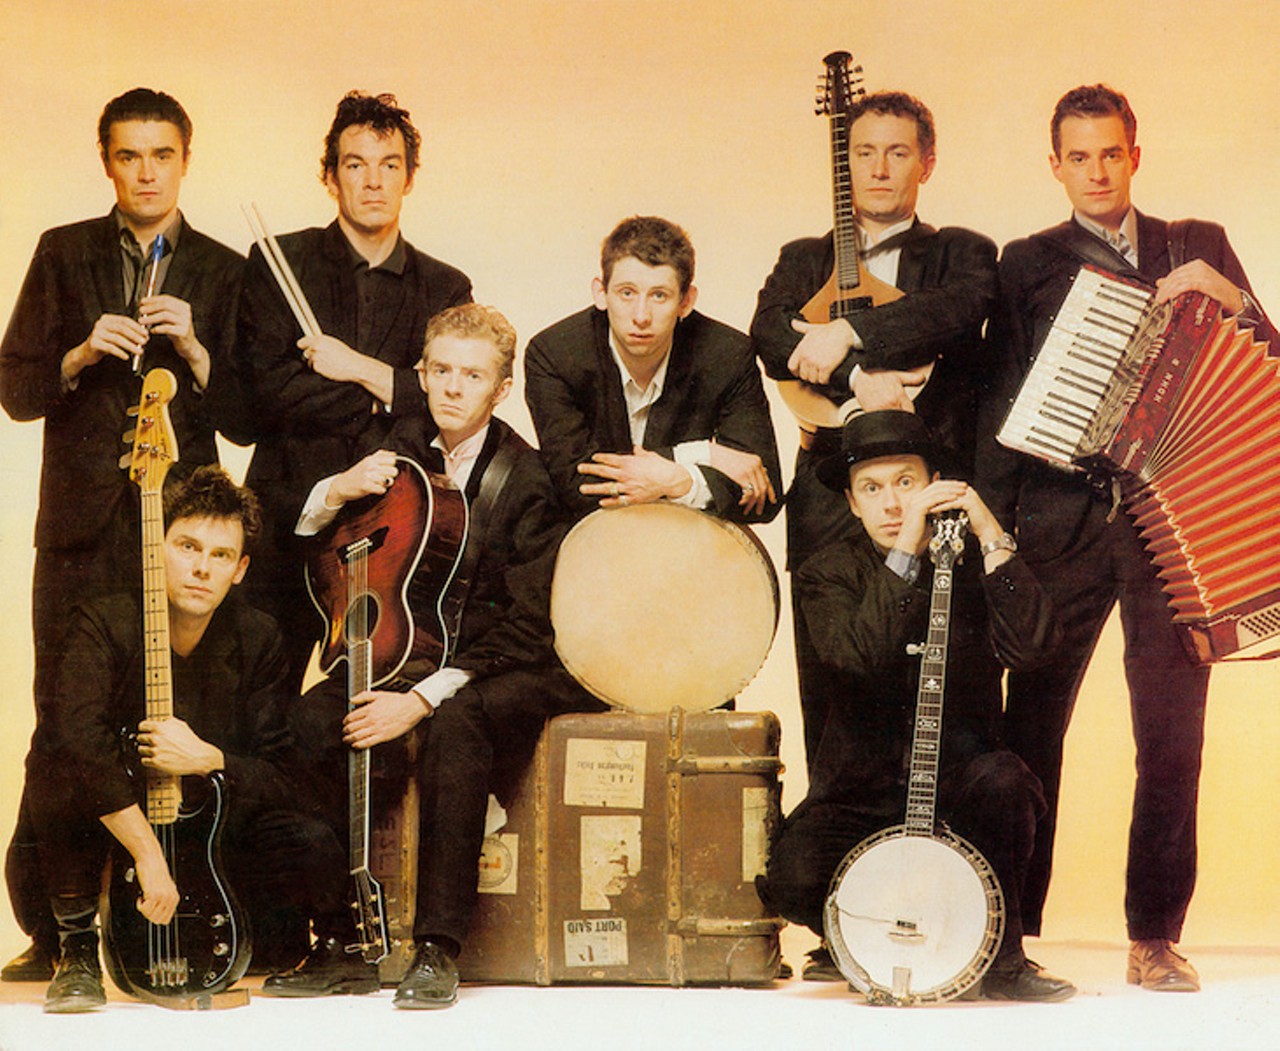 The Pogues &#151; Rum Sodomy & the Lash
OK, this one&#146;s an album, but if you&#146;re day drinking in a dirty old town and not listening to this pre-Flogging Molly Celtic punk band, then you&#146;re doing it all wrong.
Photo via Island Records